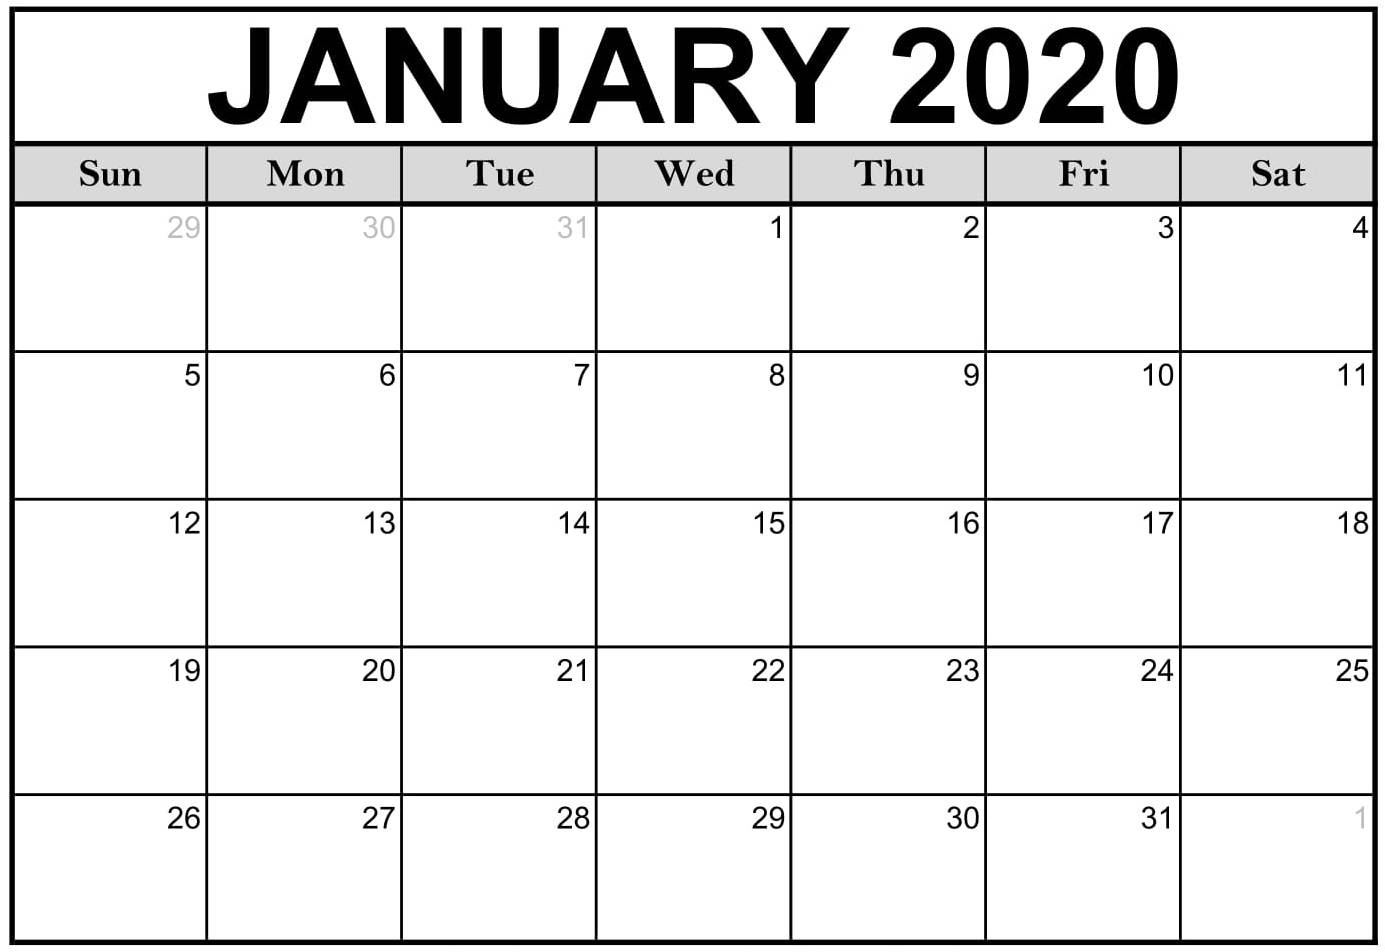 2020 Calendar You Can Edit | Calendar Printables Free Free Monthly Calendars That Can Be Edited